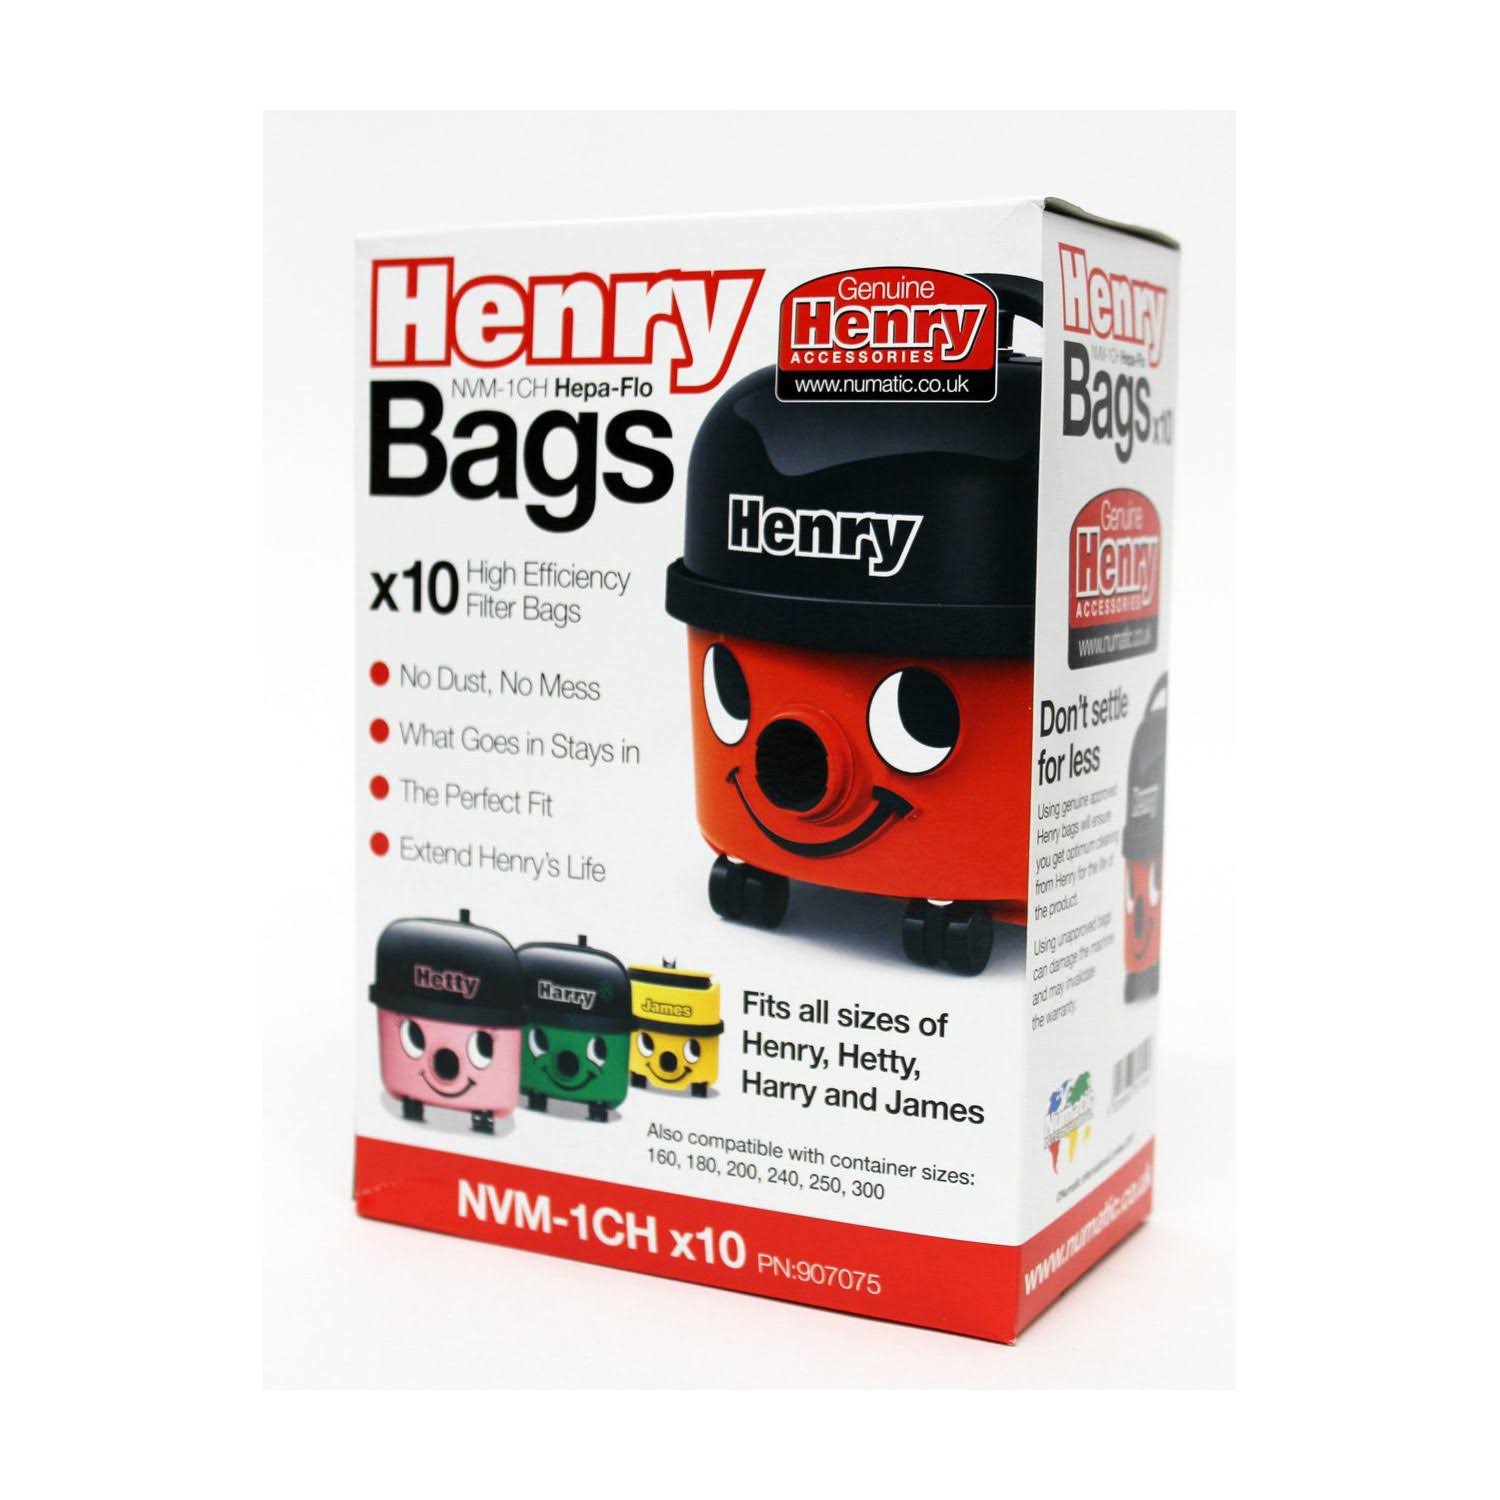 Henry Dust Bags - x10